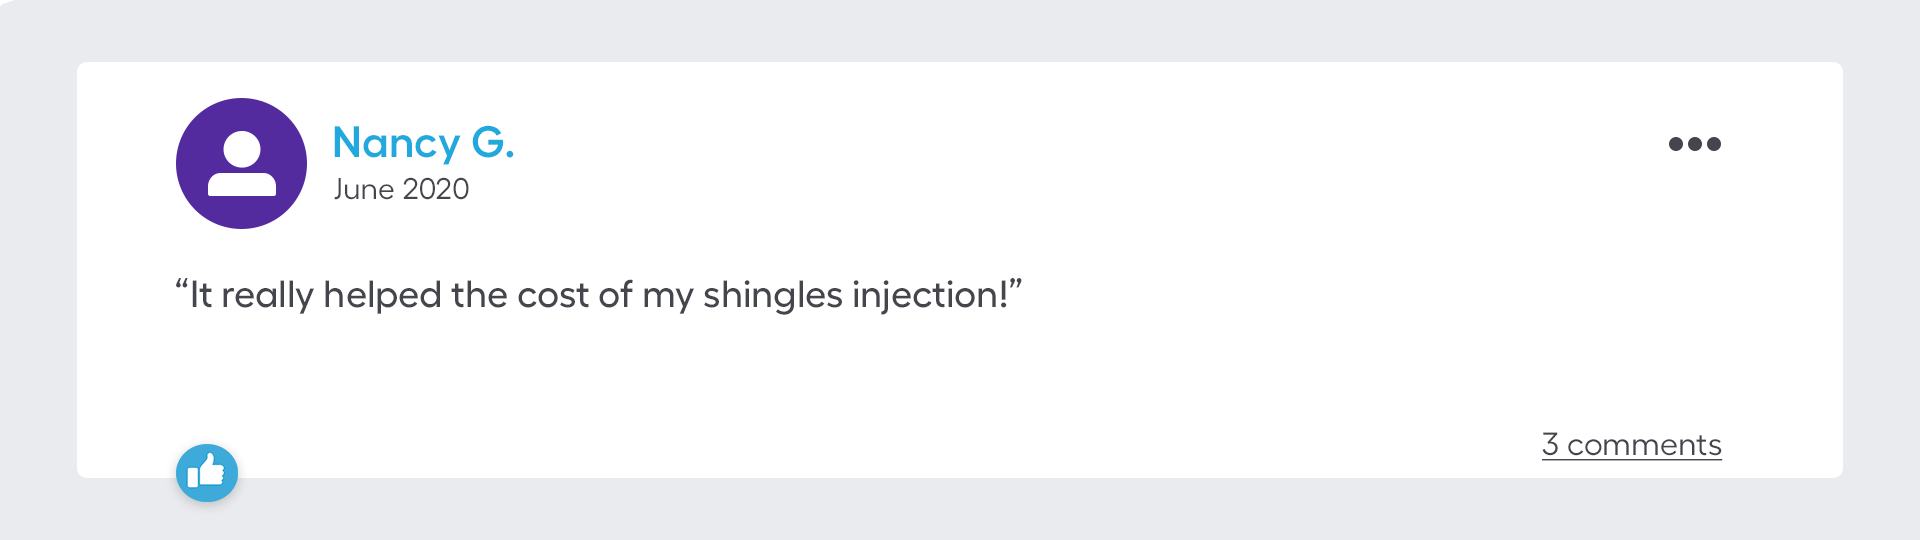 It really helped the cost of my shingles injection!